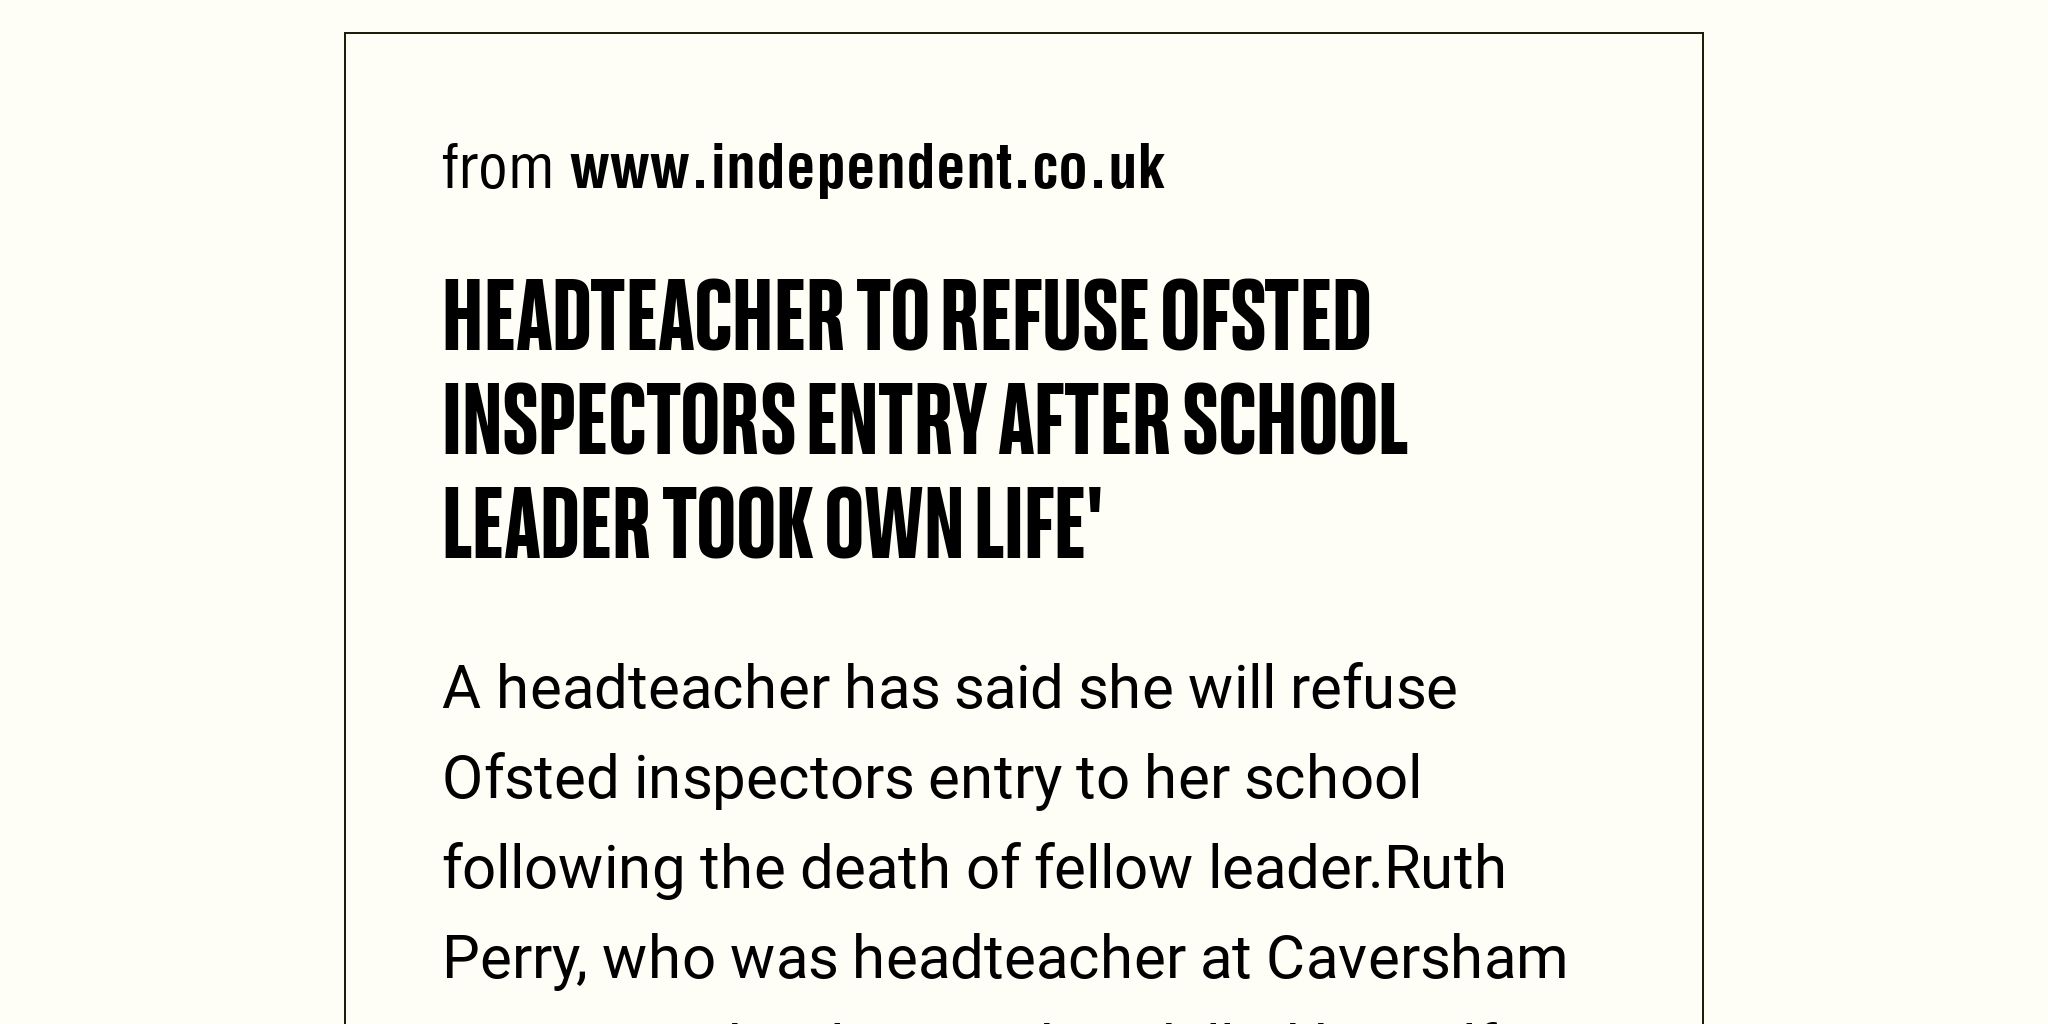 Headteacher To Refuse Ofsted Inspectors Entry After School Leader Took Own Life Briefly 